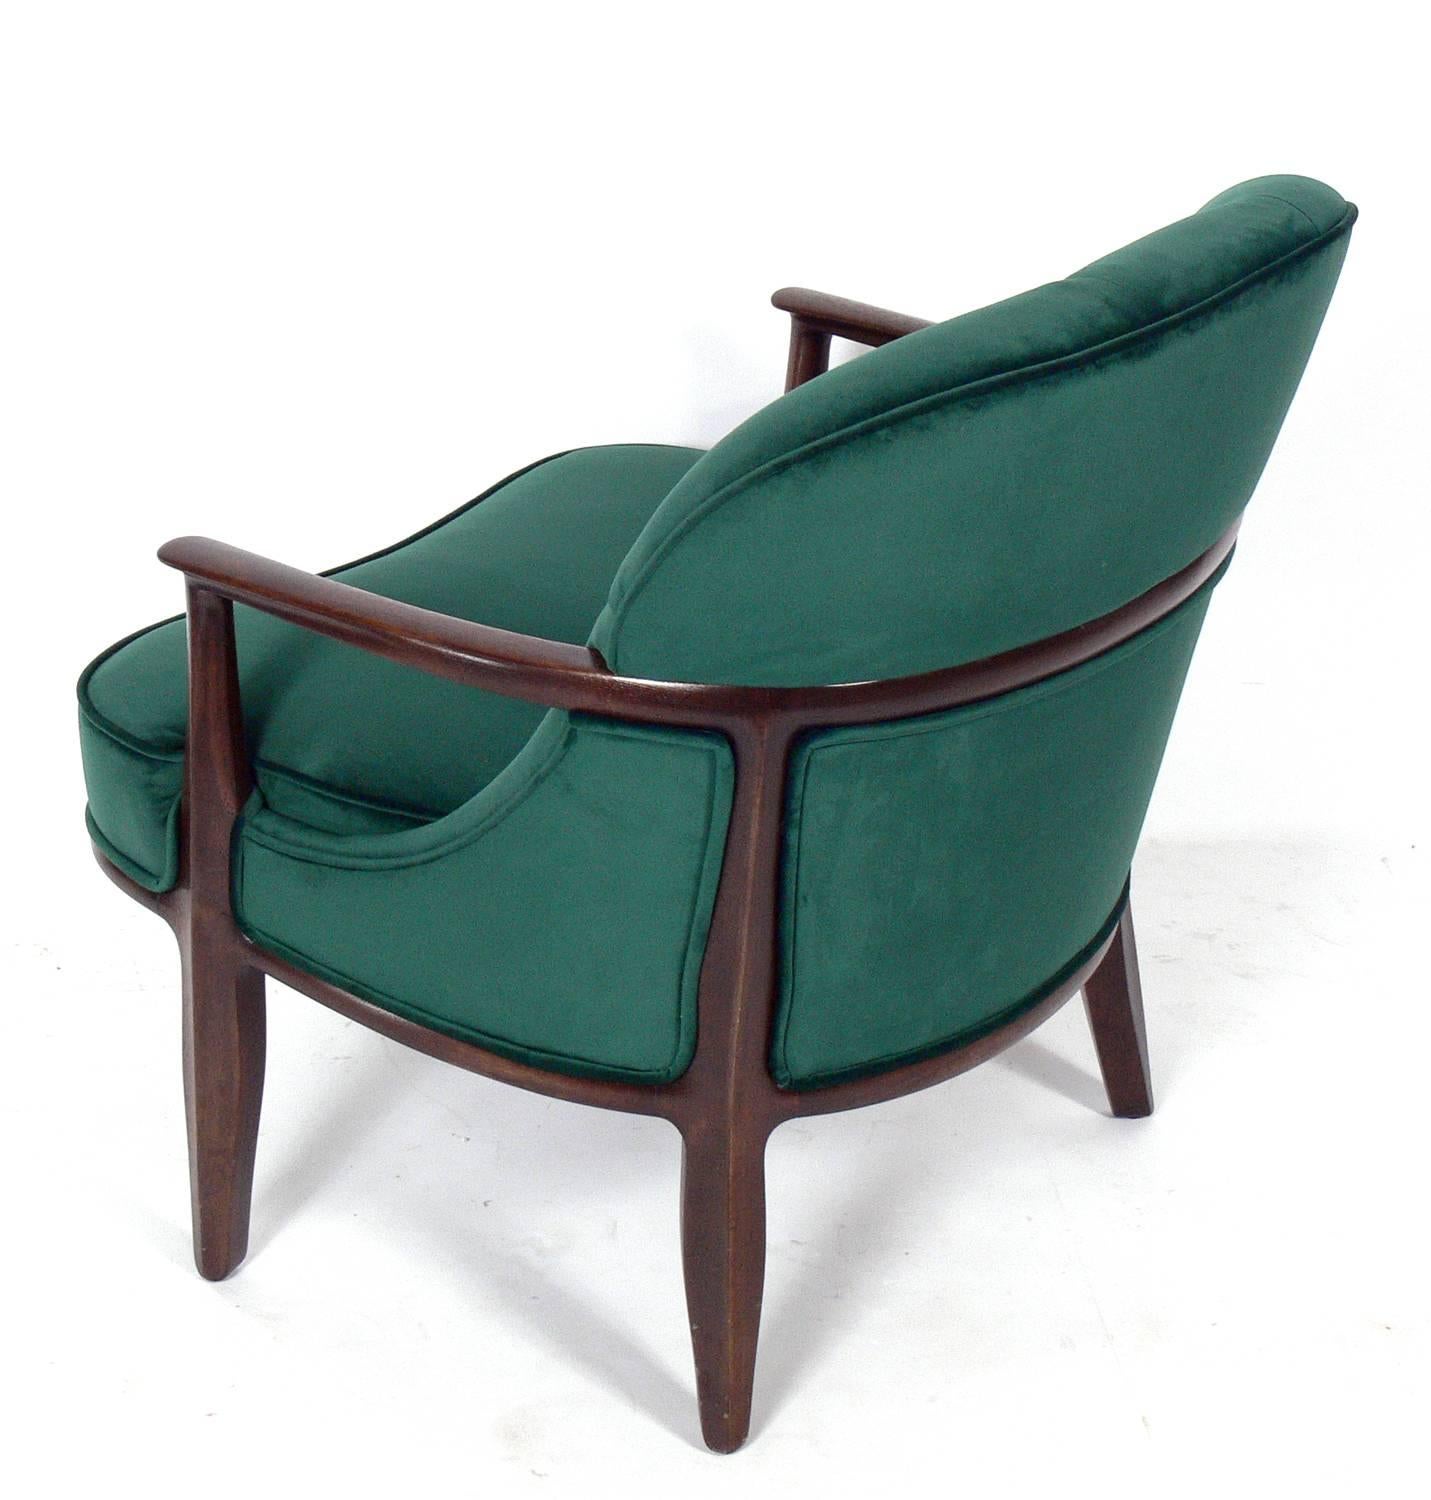 American Pair of Tufted Lounge Chairs by Edward Wormley for Dunbar